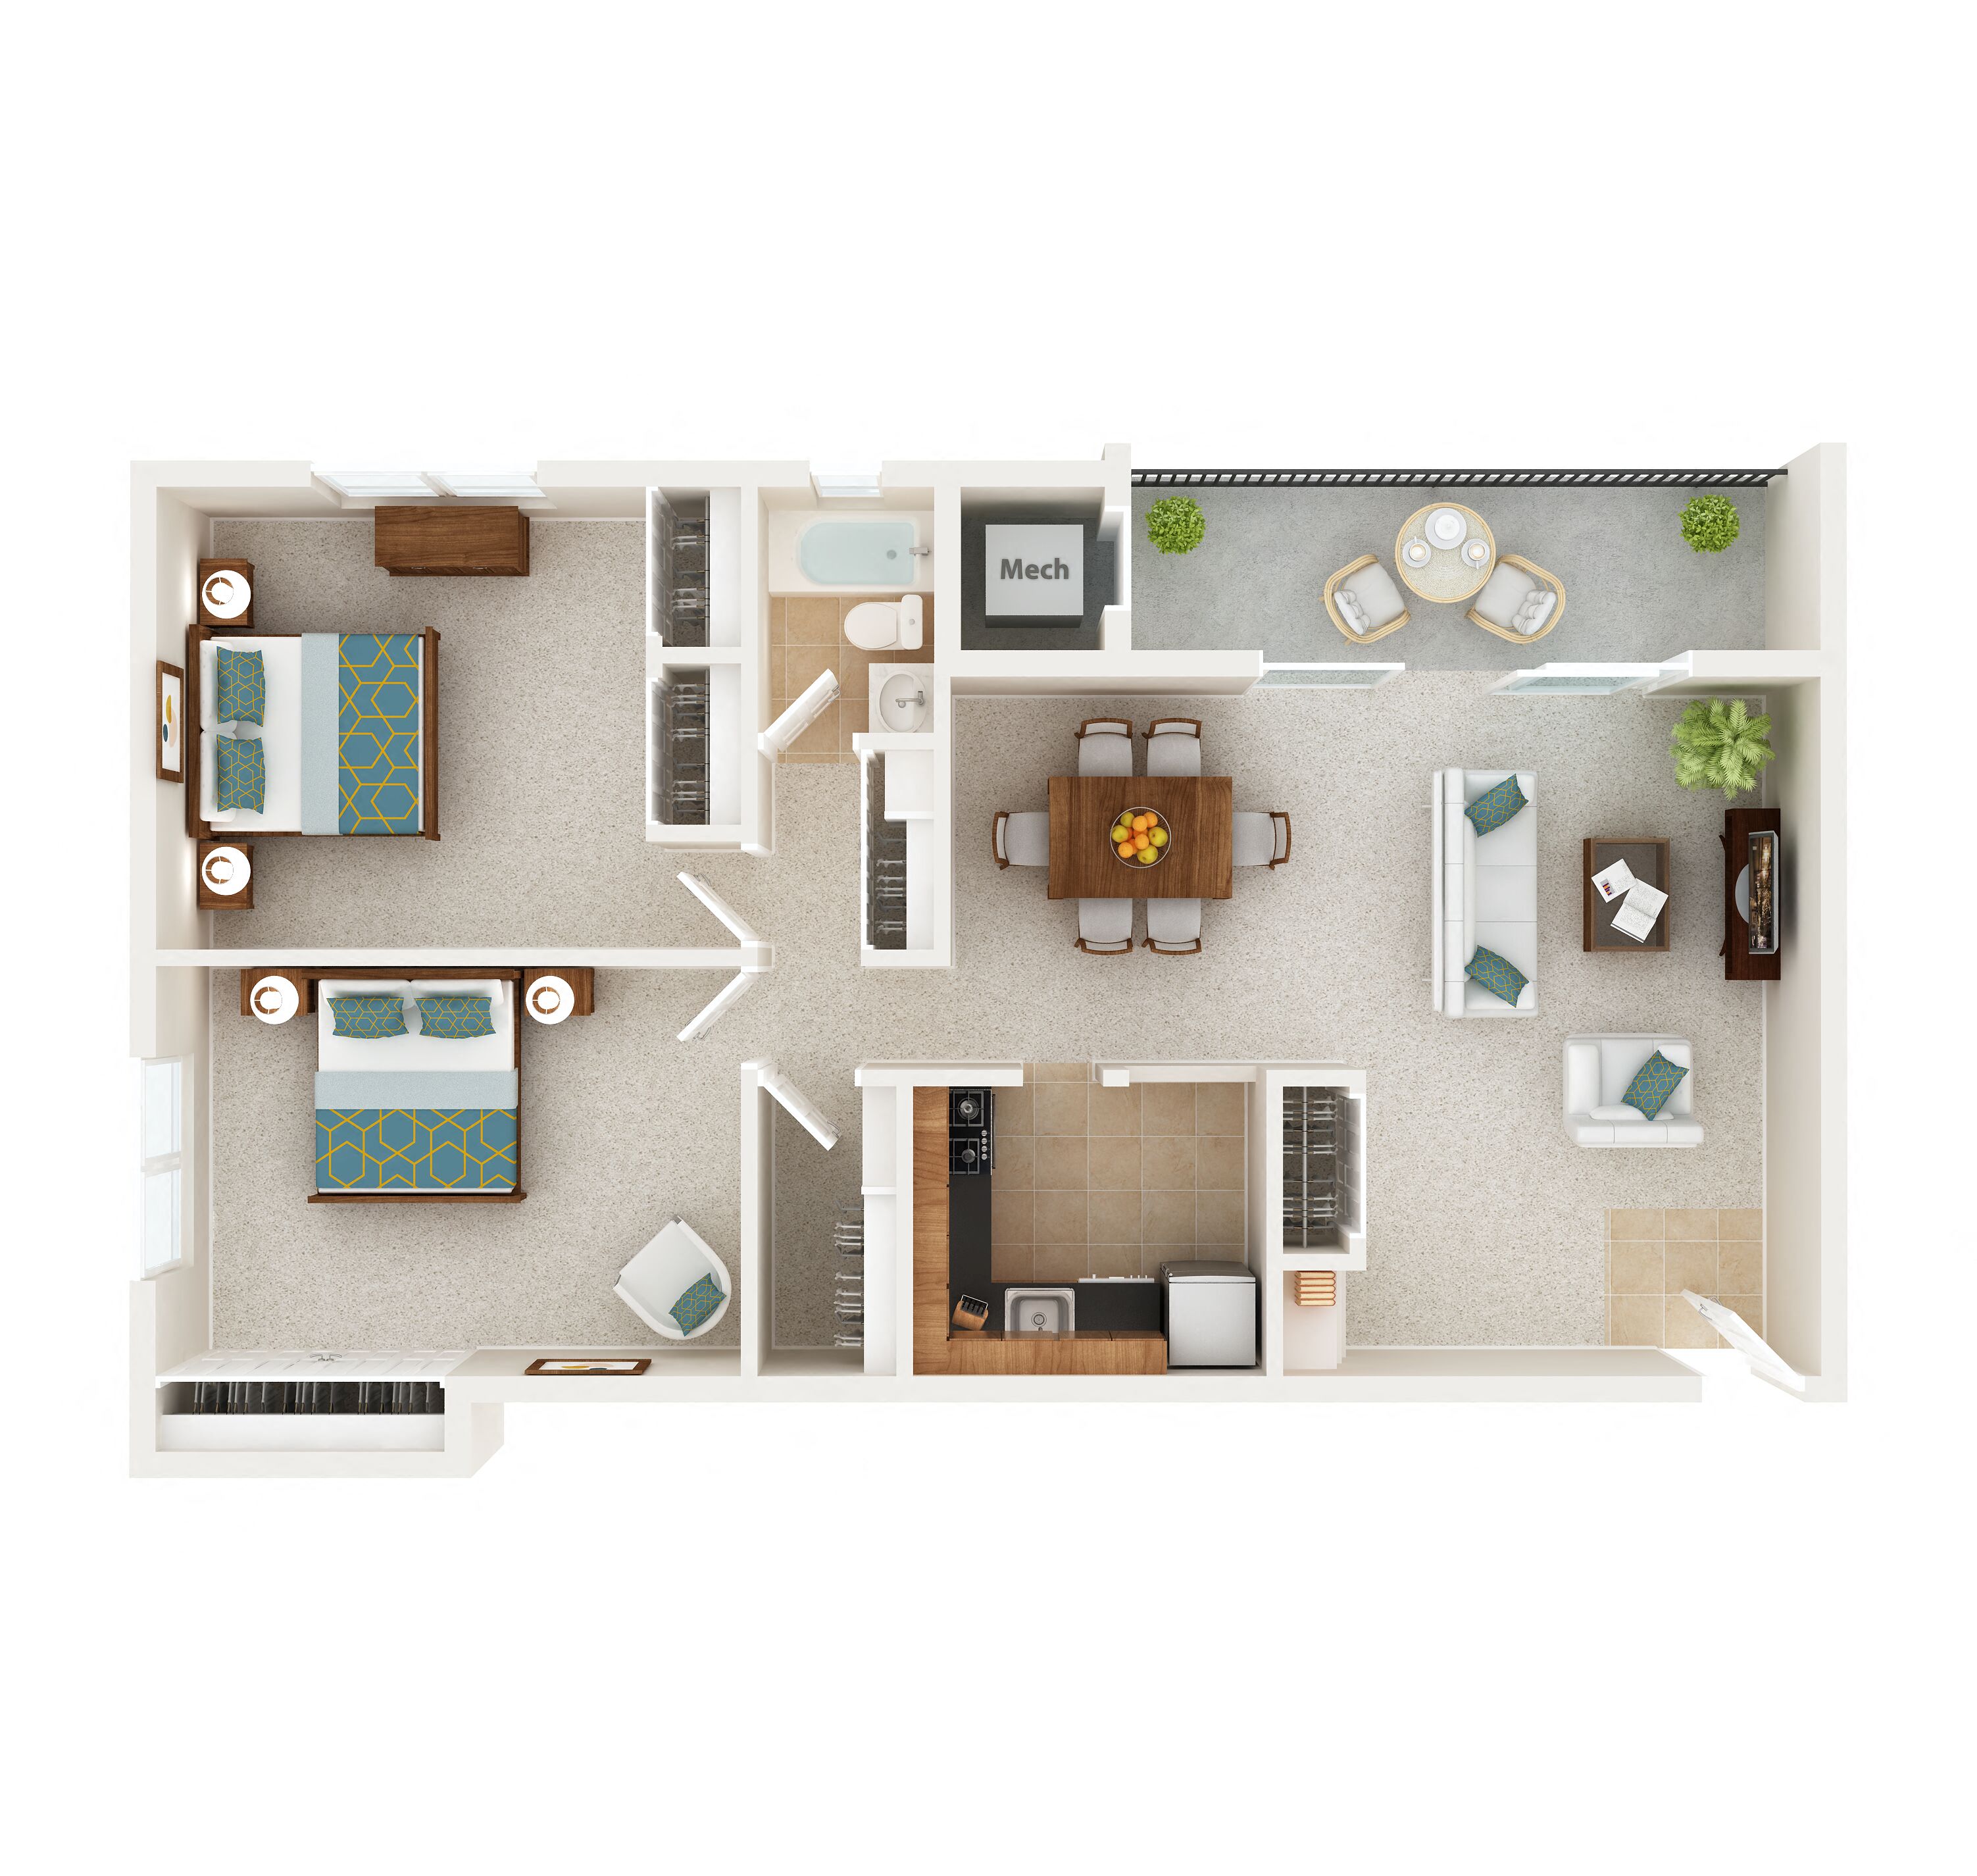 Floor Plans of Spa Cove Apartments in Annapolis, MD